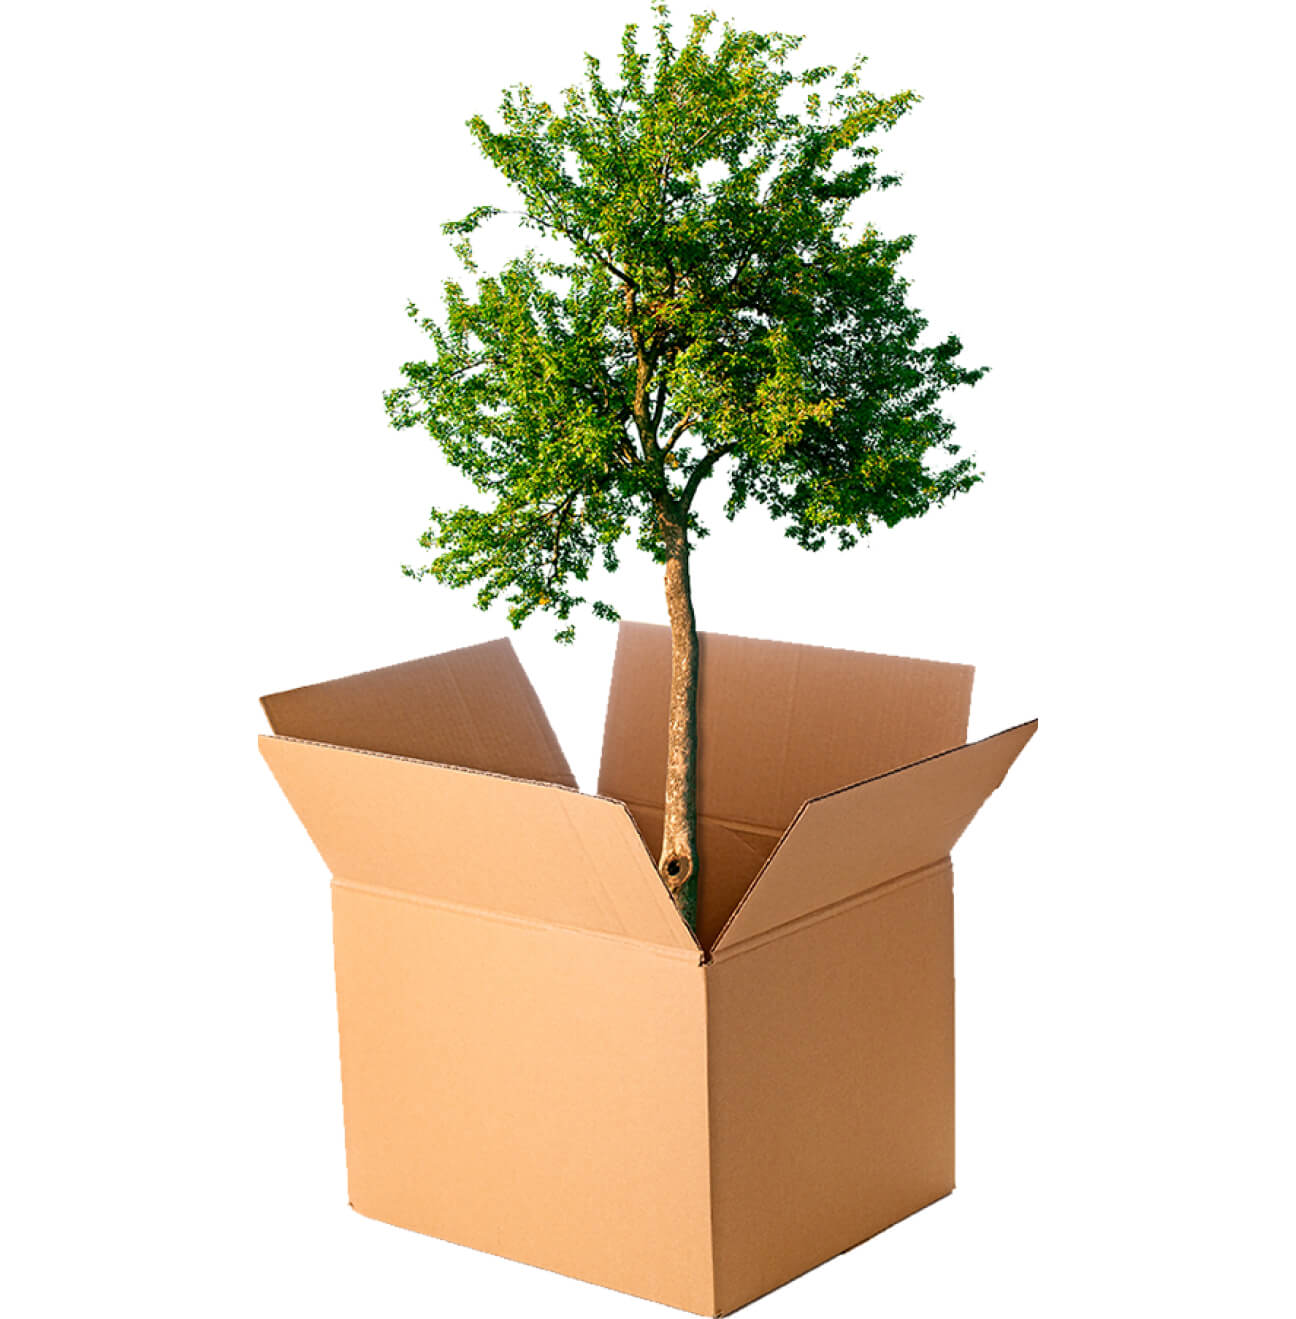 Young tree in a box